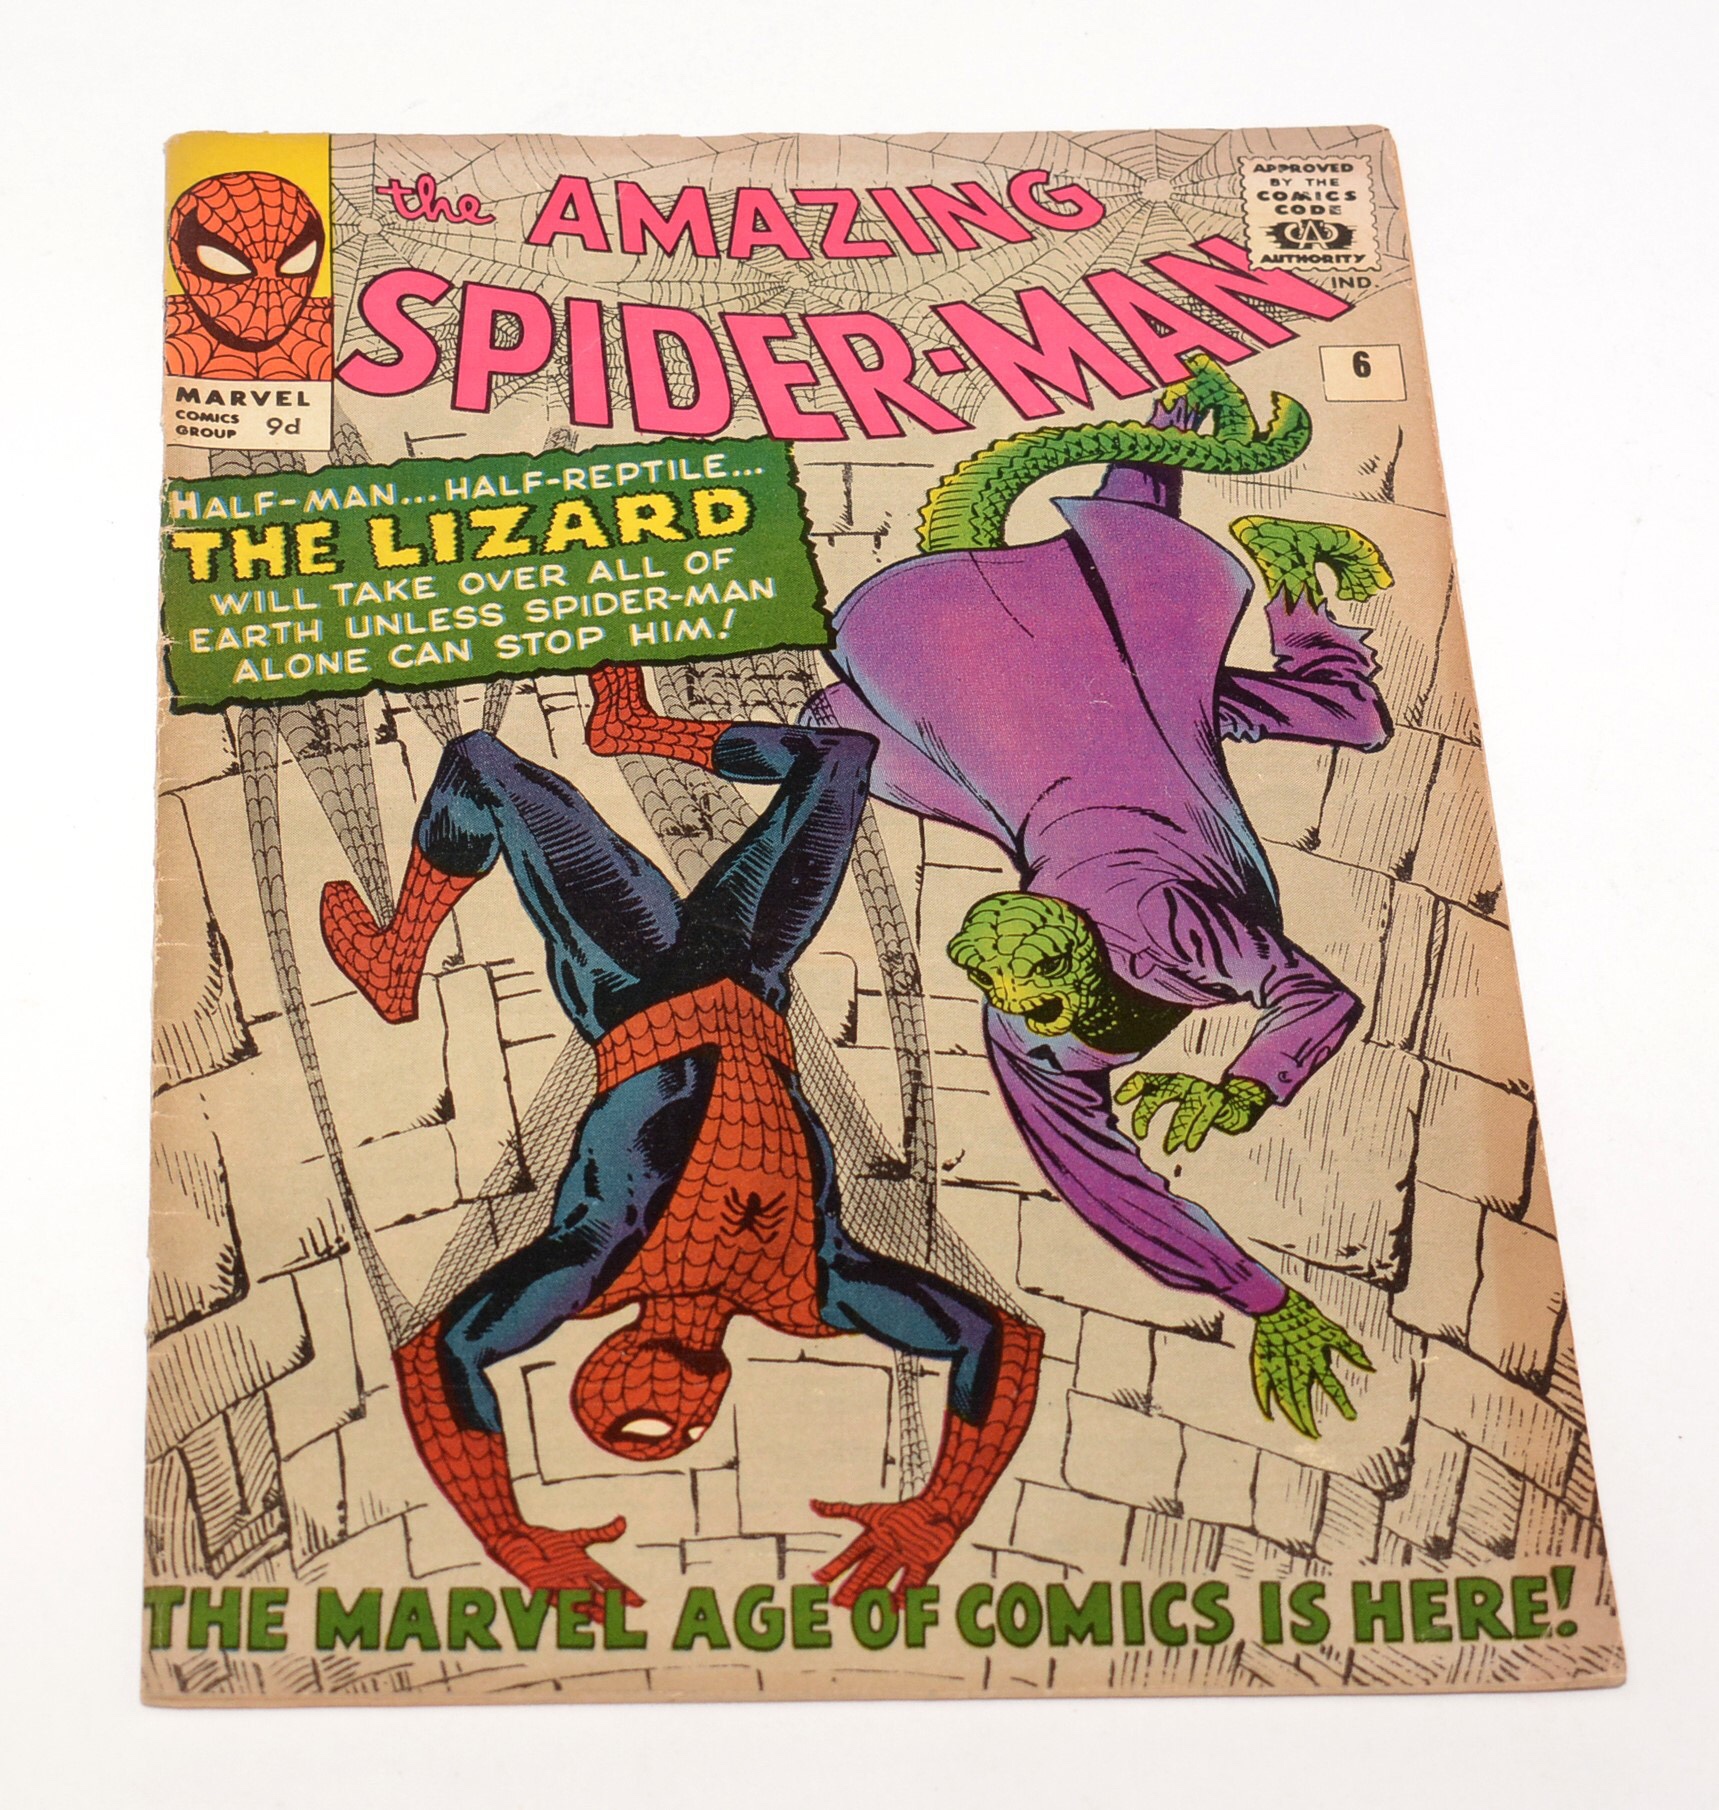 The Amazing Spider-Man #6 (Pence Copy)